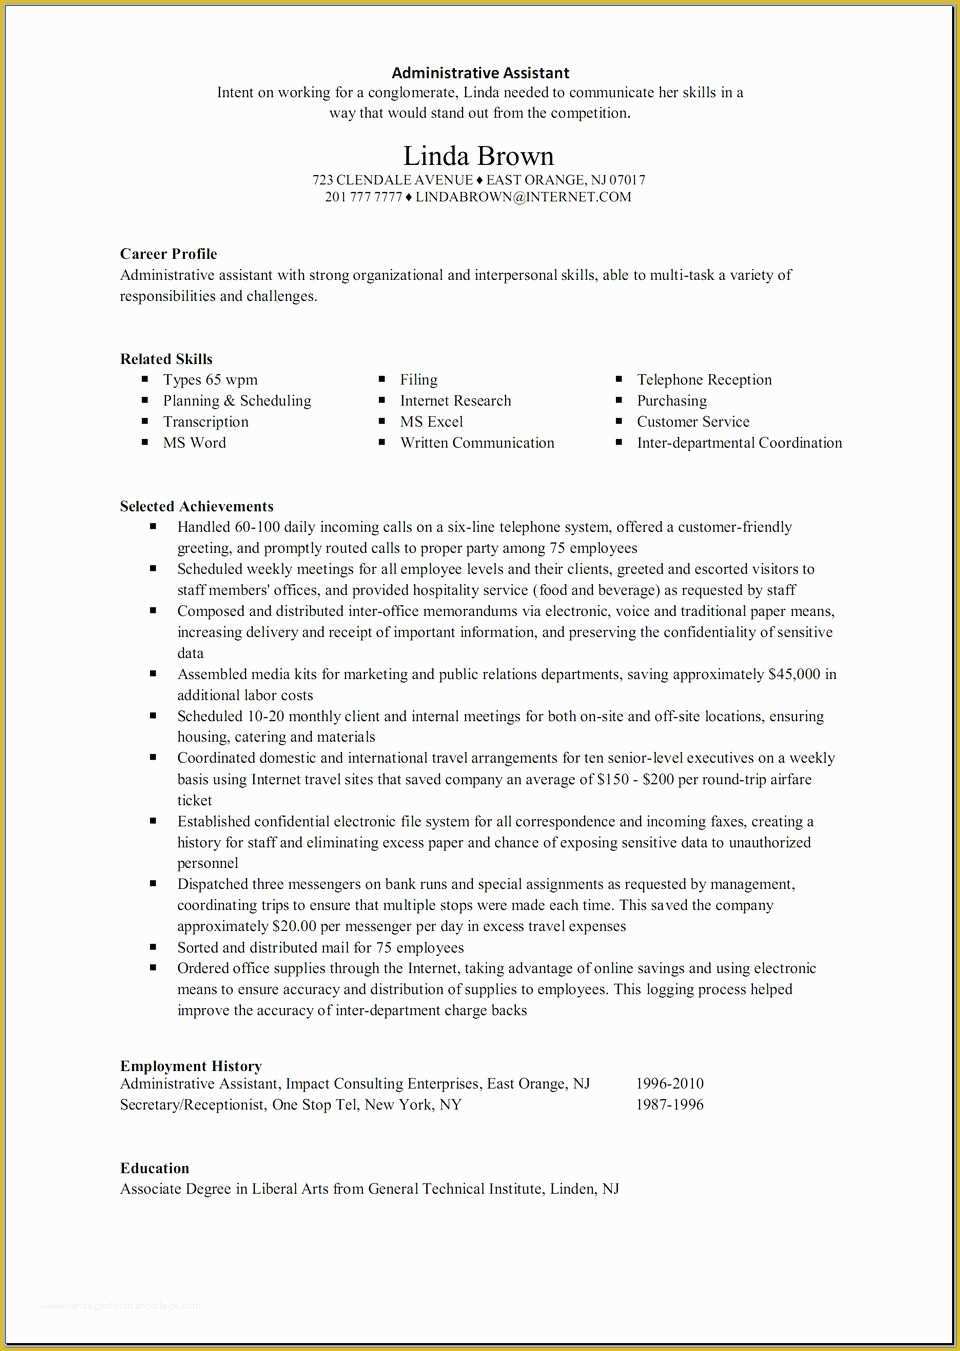 Free Professional Resume Templates 2017 Of Administrative Professional Resume Template Templates